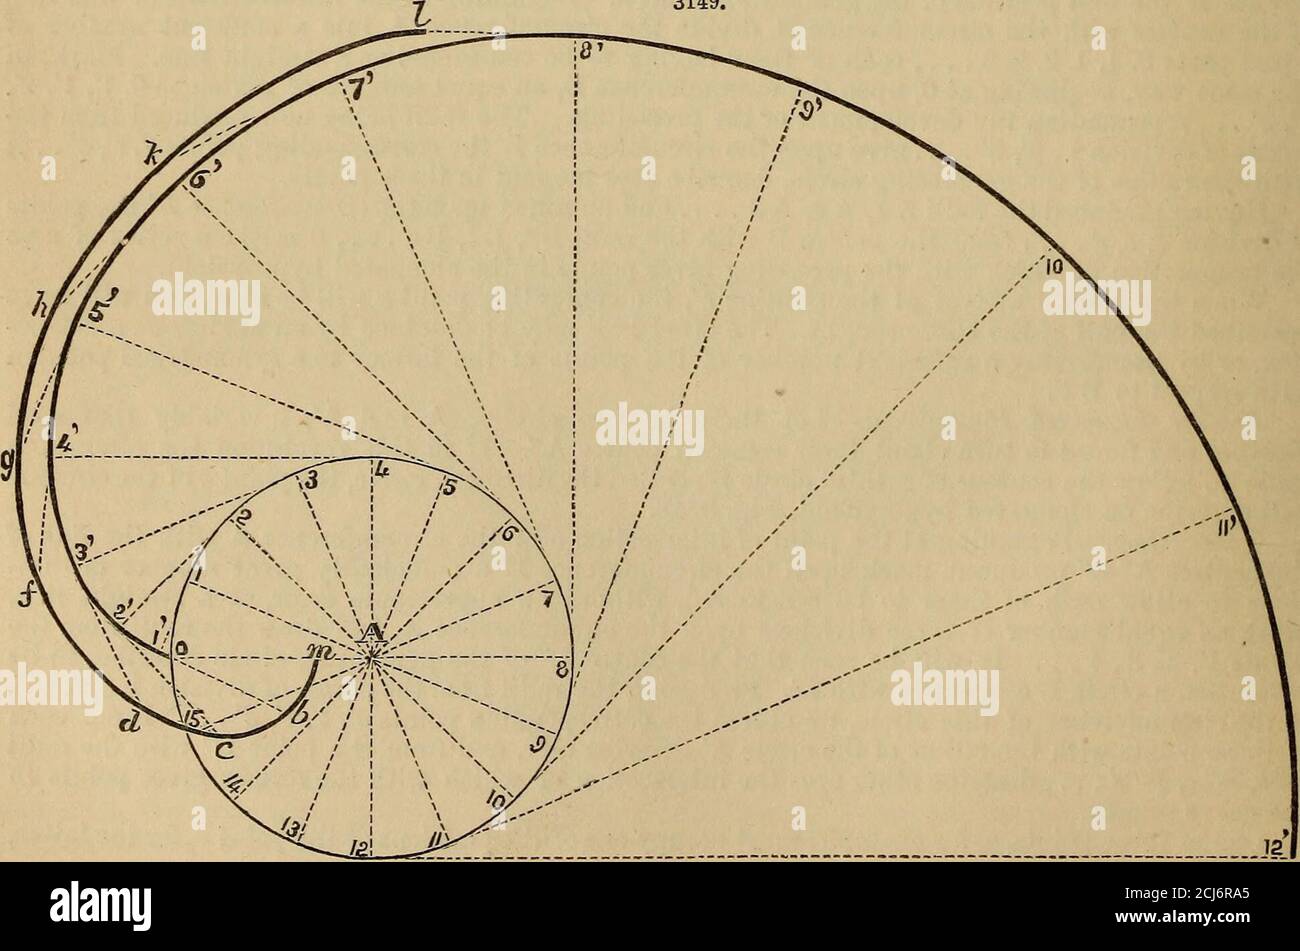 Spons Dictionary Of Engineering Civil Mechanical Military And Naval With Technical Terms In French German Italian And Spanish 7jo Gt 7 Involute Of A Cirde Uyan Curve Is Generated By The End